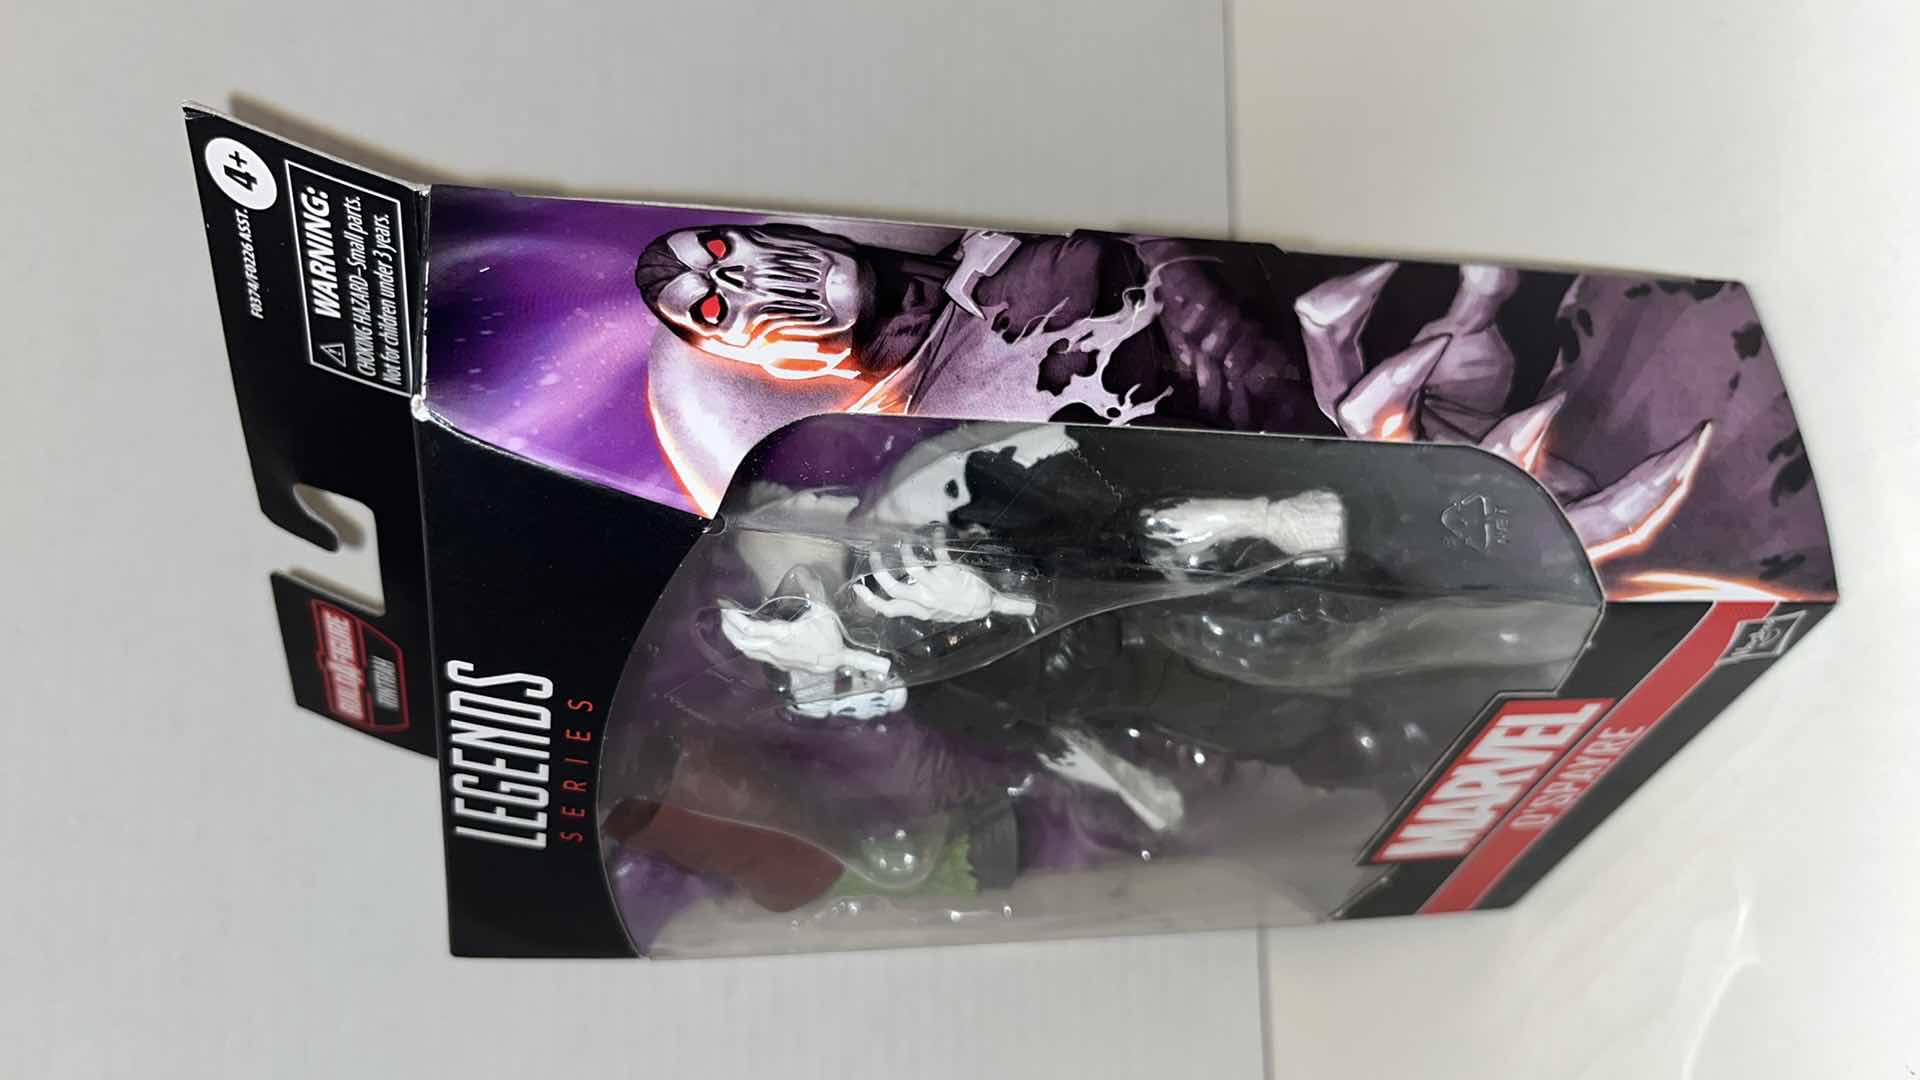 Photo 2 of NEW HASBRO MARVEL LEGEND SERIES ACTION FIGURE & ACCESSORIES, “D’SPAYRE” $30.00 (1)